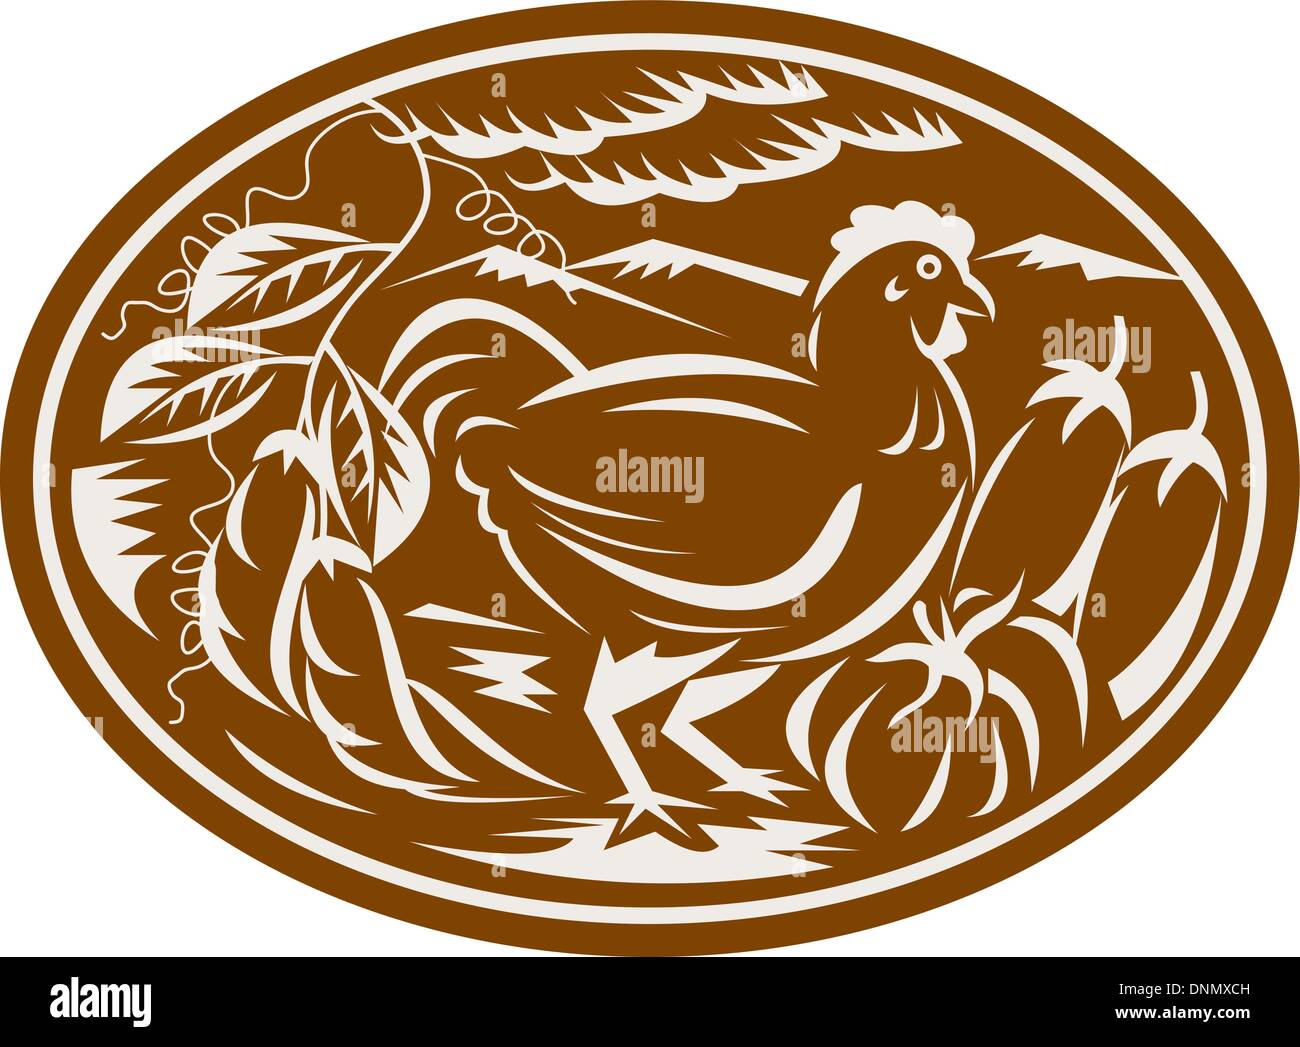 Illustration of a hen chicken side view with beans eggplant squash pumpkin vegetable crop set inside oval done in retro woodcut Stock Vector